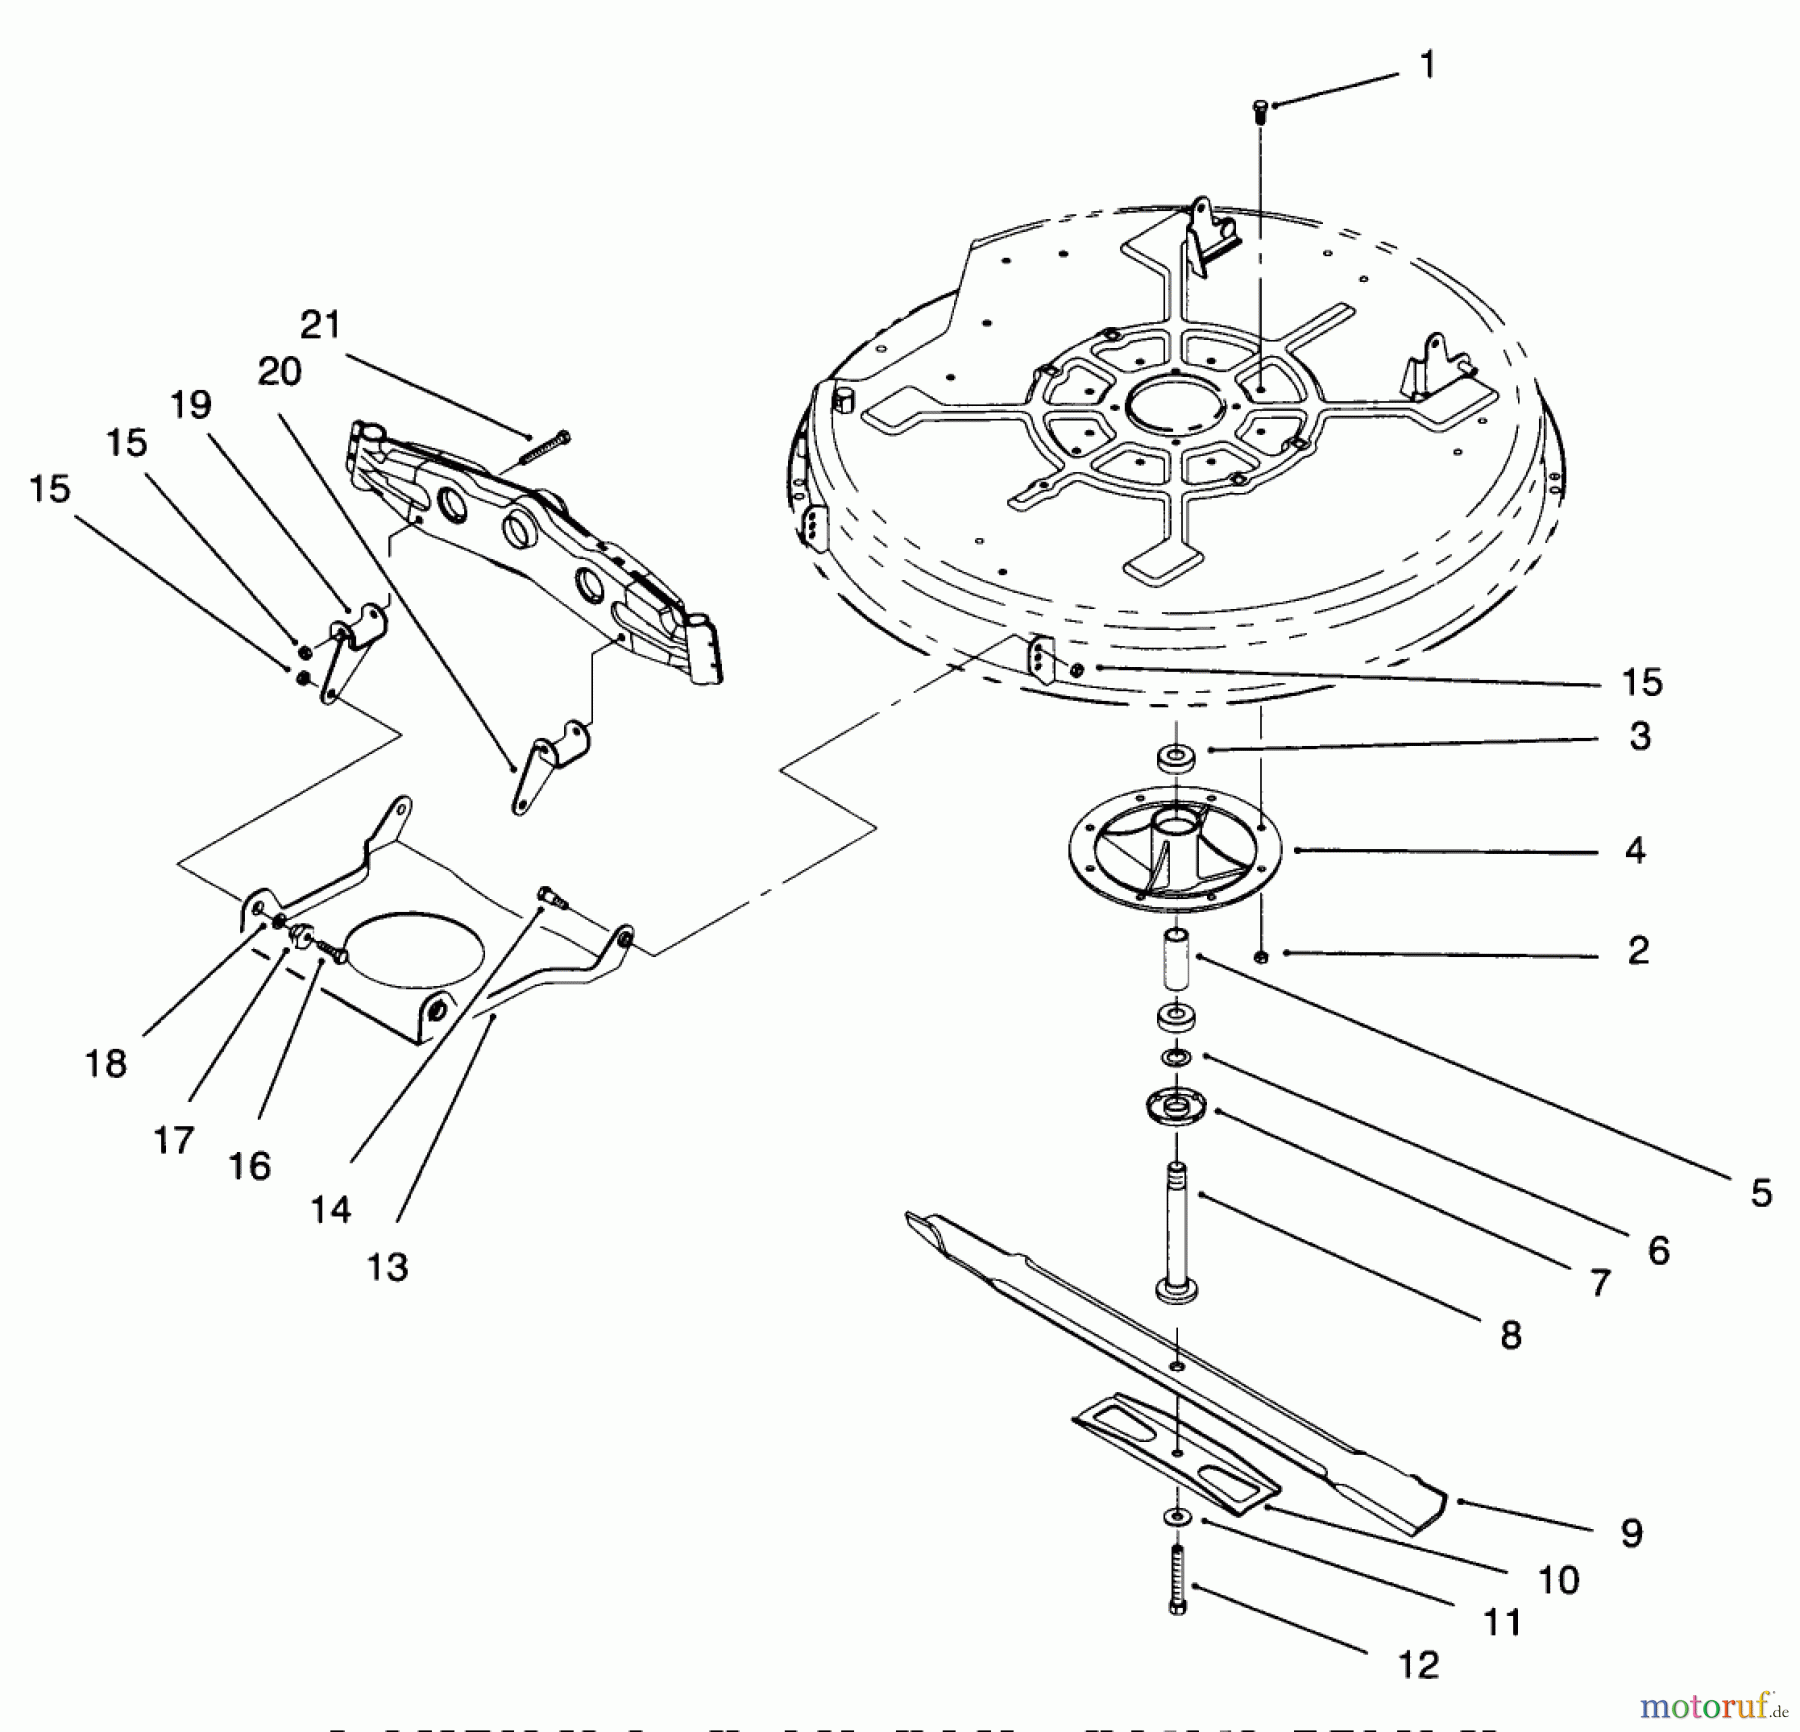  Toro Neu Mowers, Lawn & Garden Tractor Seite 1 71201 (12-32XL) - Toro 12-32XL Lawn Tractor, 1996 (6900001-6999999) SPINDLE & BLADE ASSEMBLY